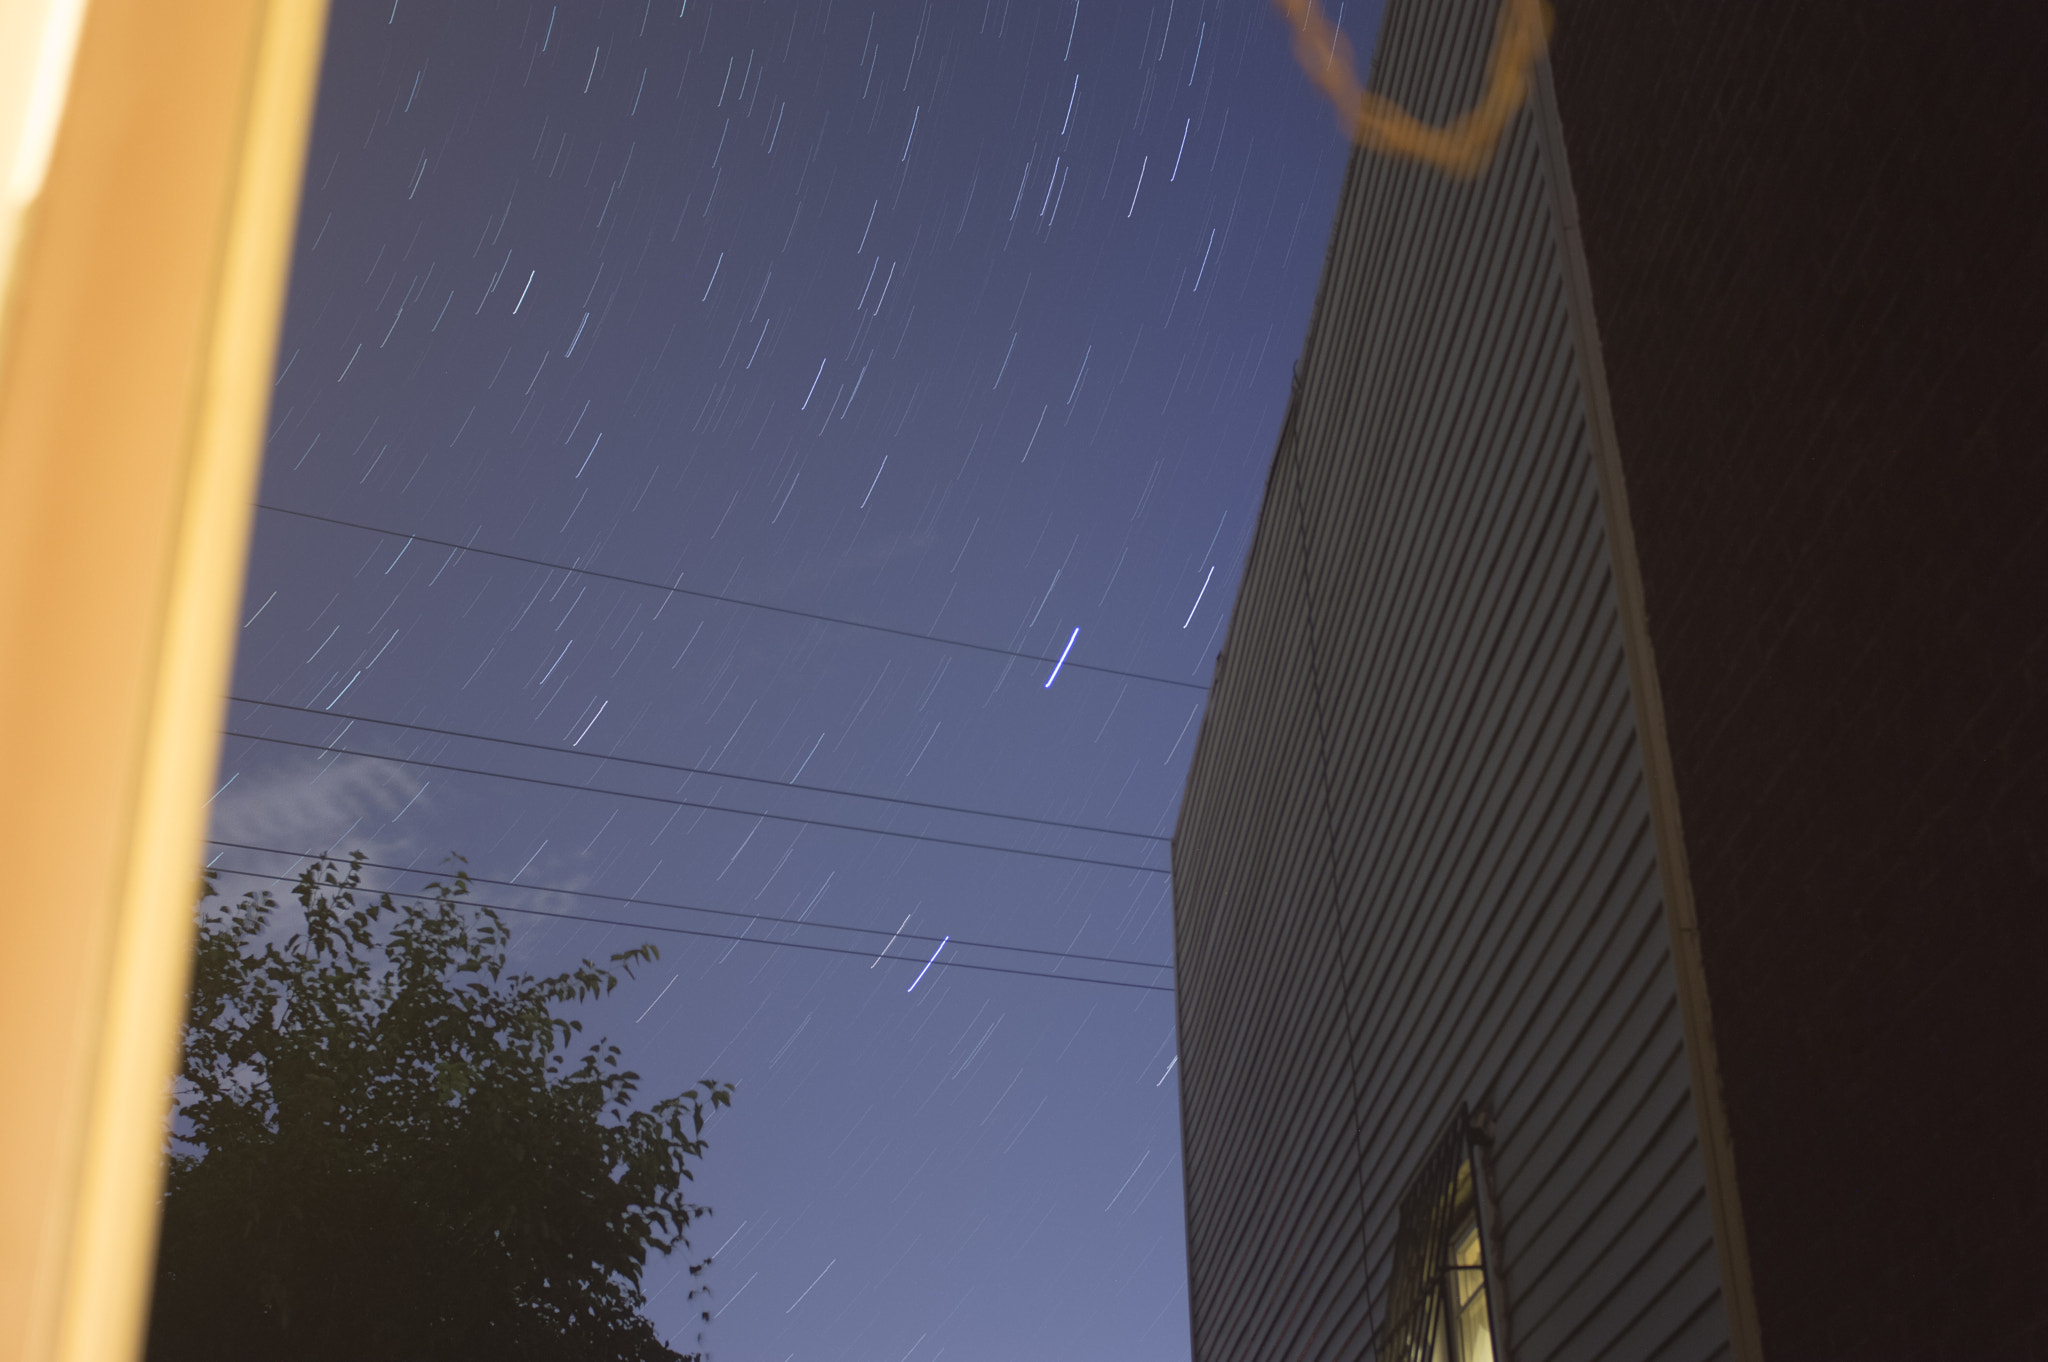 Nikon D3200 sample photo. My attempt at doing star trails photography last n ... photography